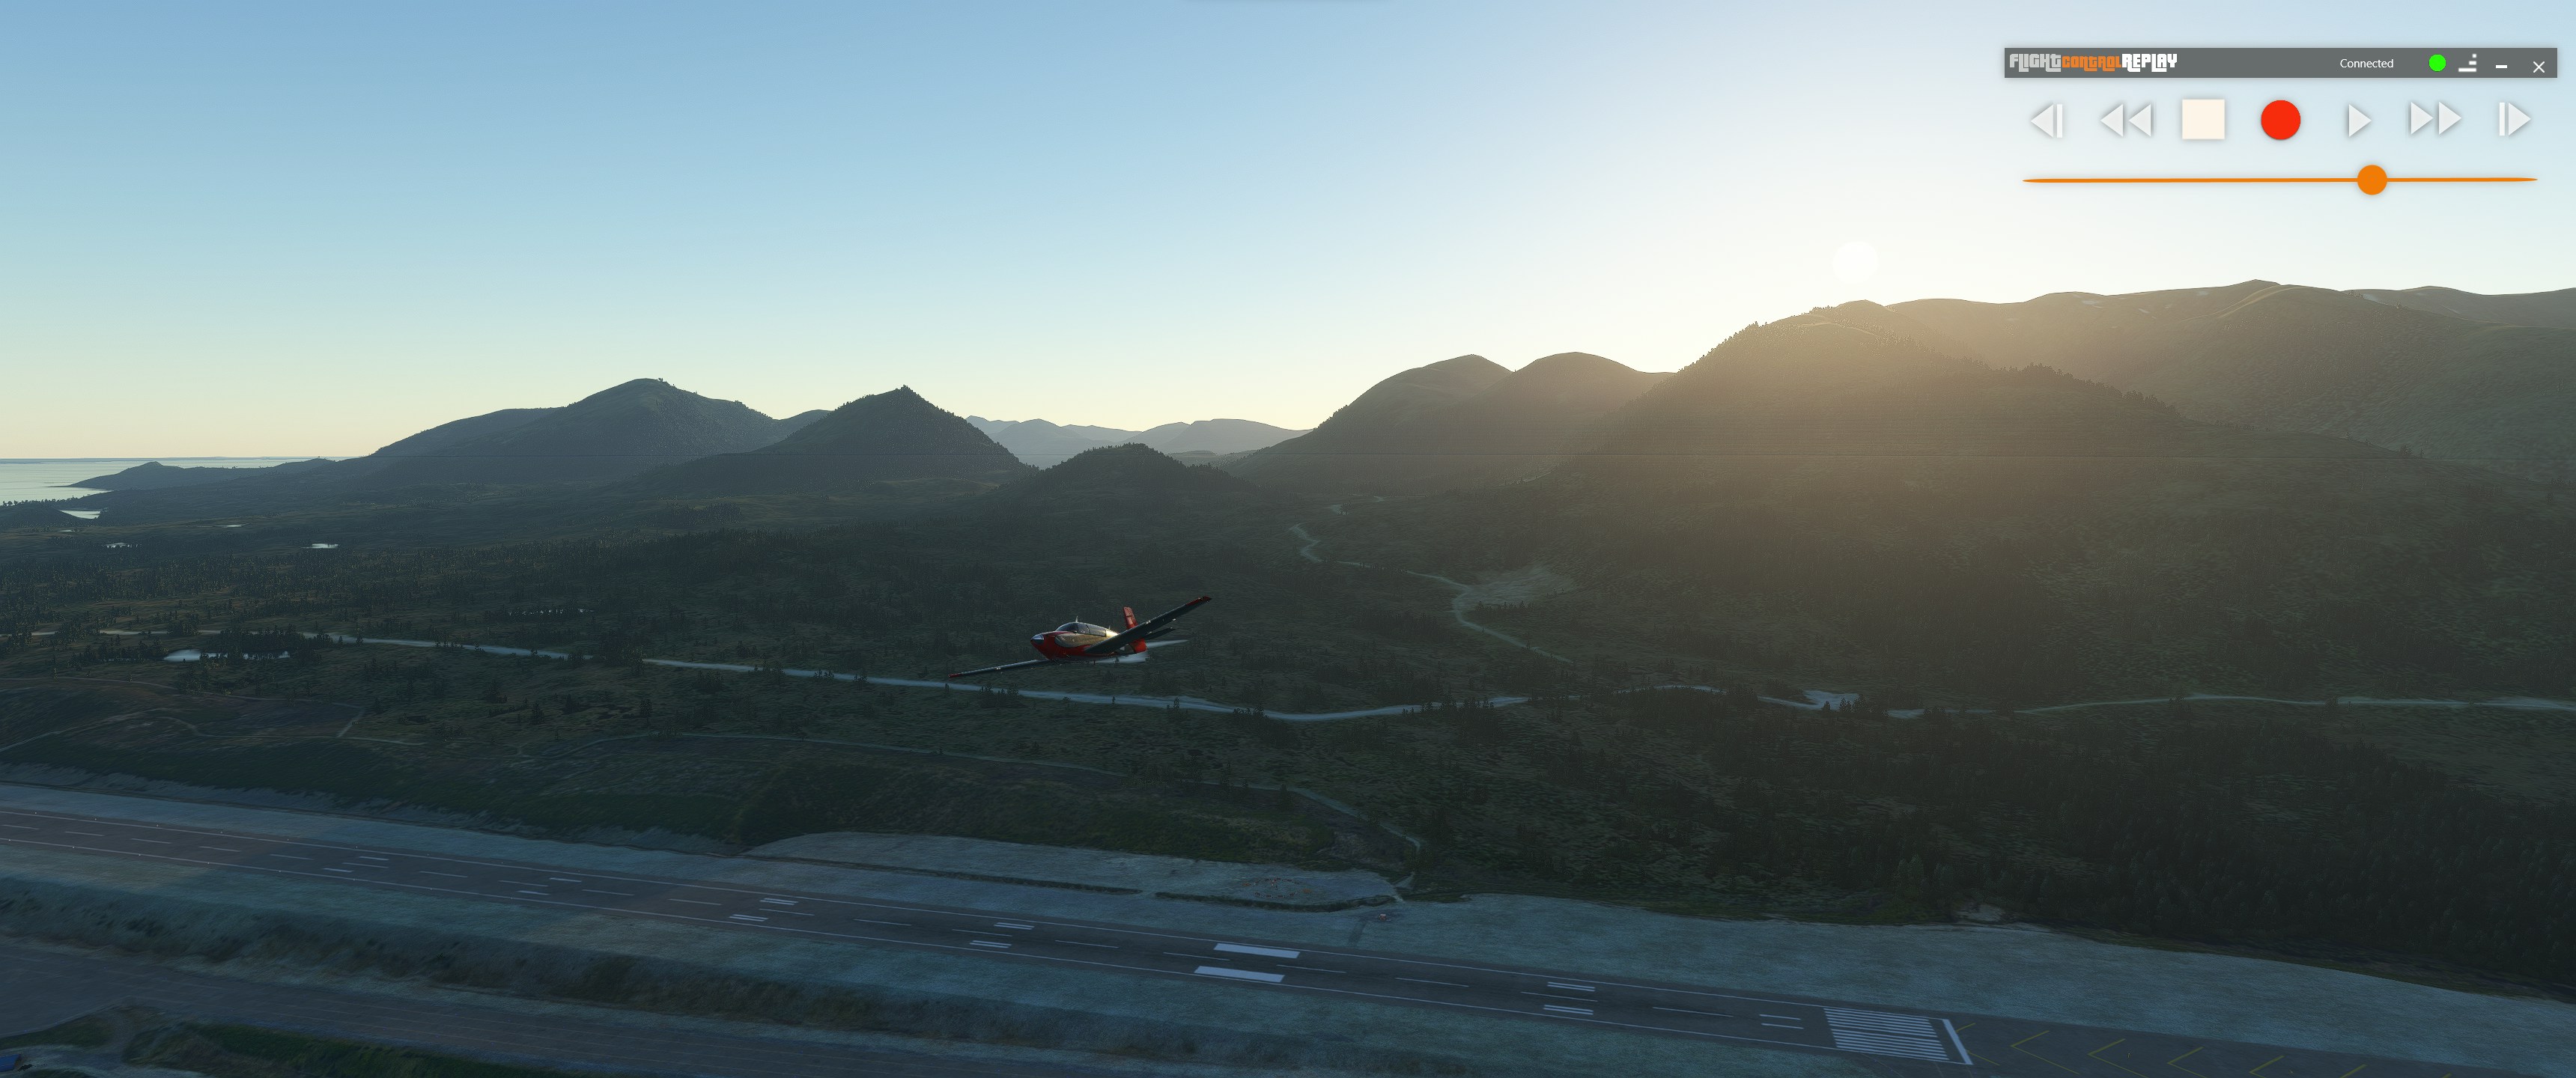 FlightControlReplay v5 Summer Update Now Out Adding Fly-By Camera